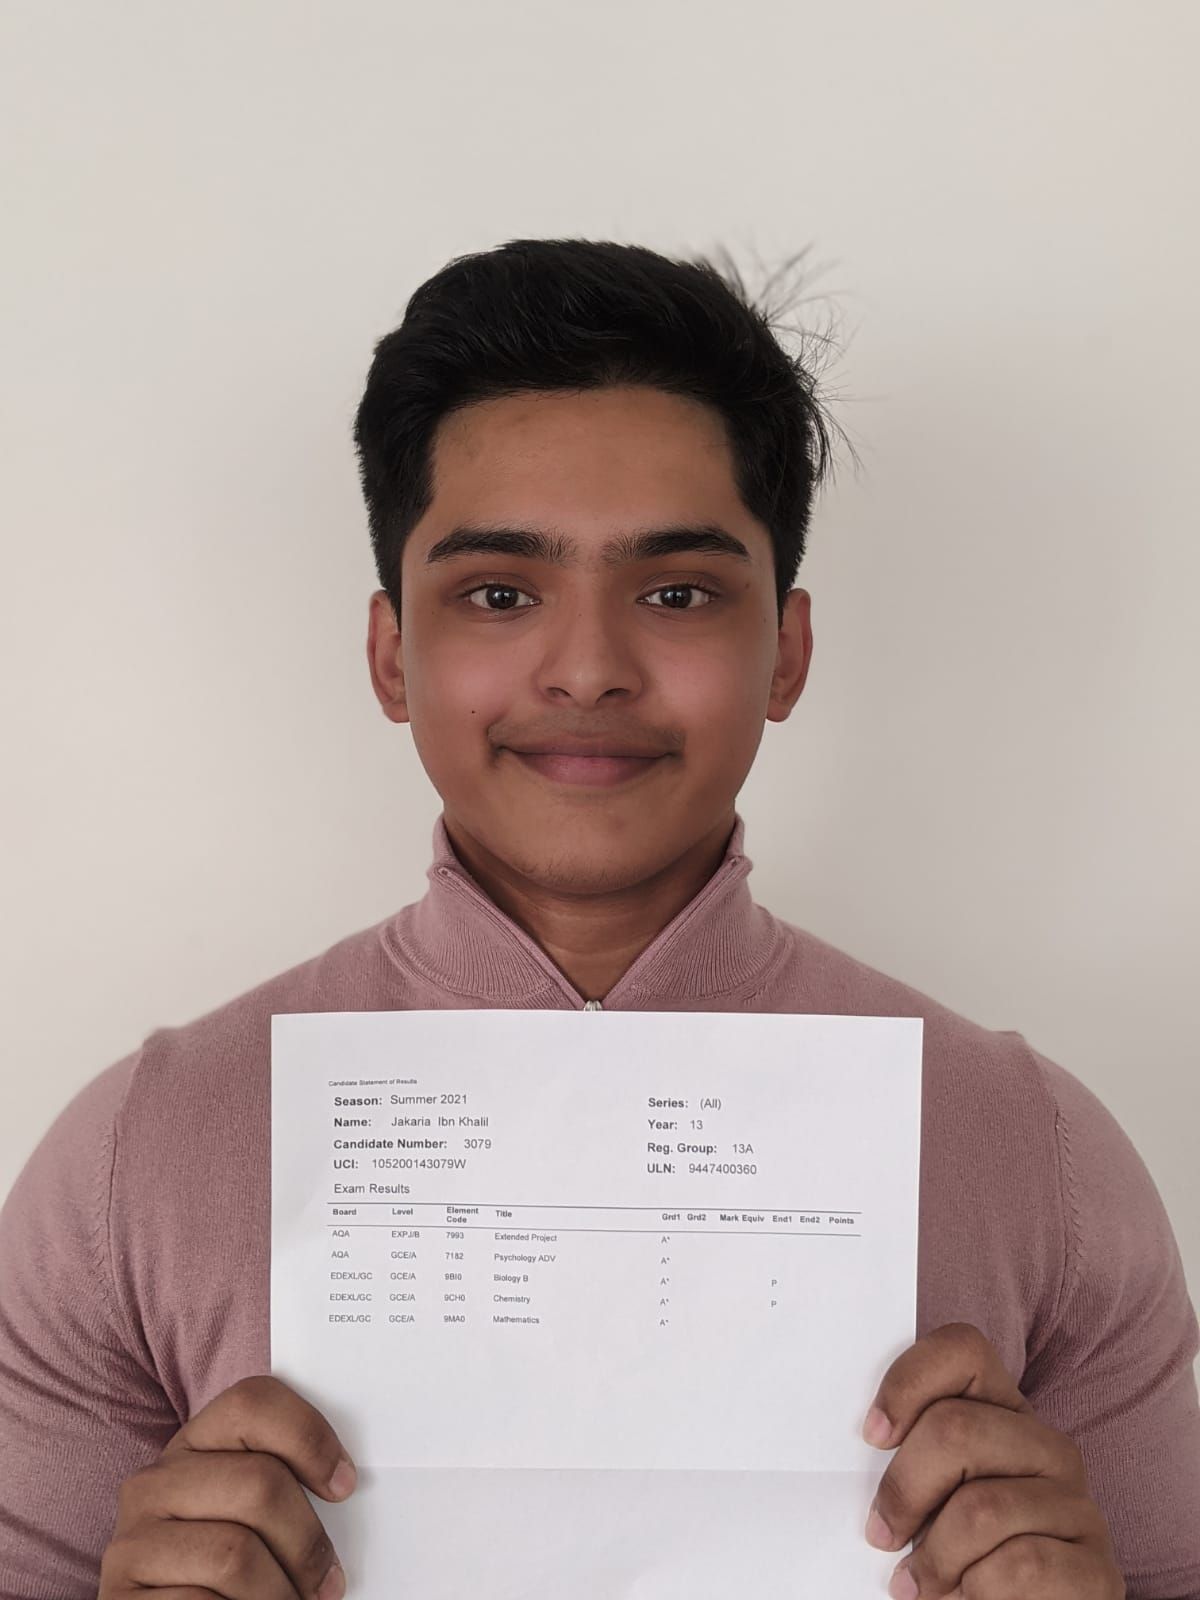 Image of Jakaria, who is going to UCL to study Medicine